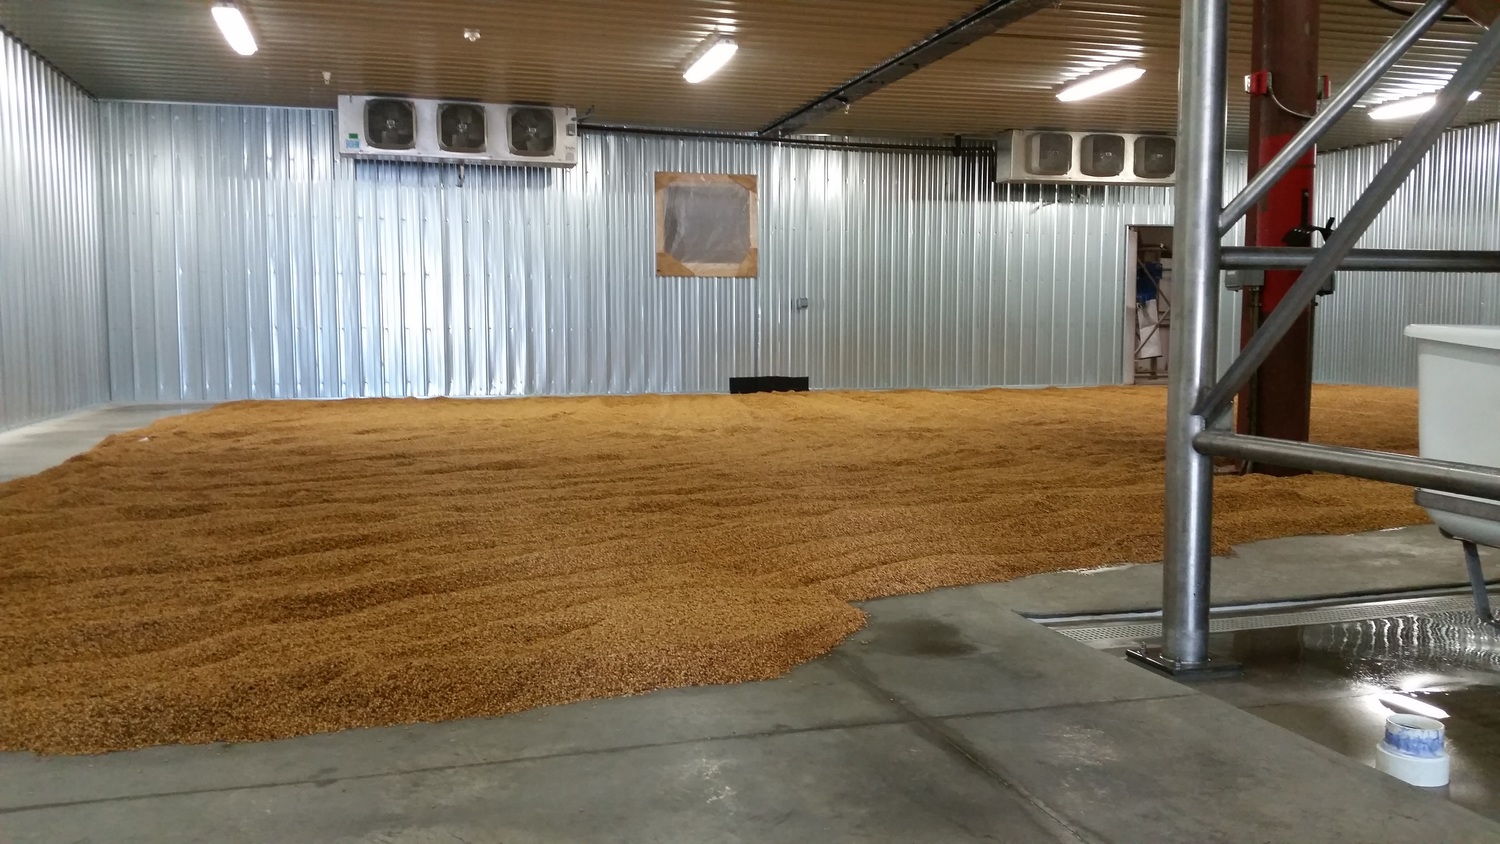  On the floor at Blue Ox Malthouse are tons of recently steeped grains that have begun the germination process. Behind the back wall is the kiln. 